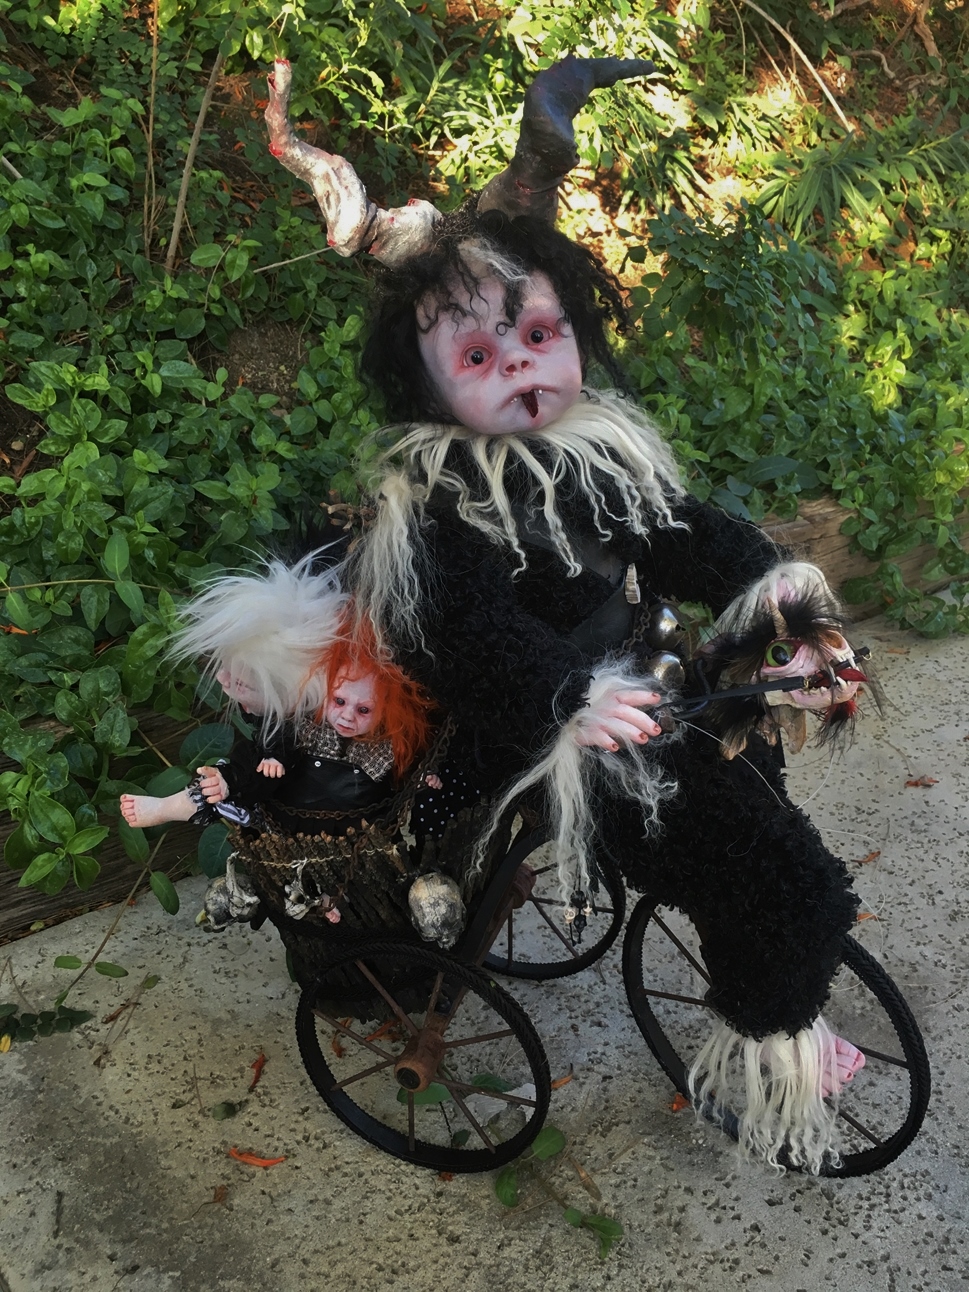 baby krampus artdoll with fur and horns is riding on a vintage tricycle with child dolls in his basket